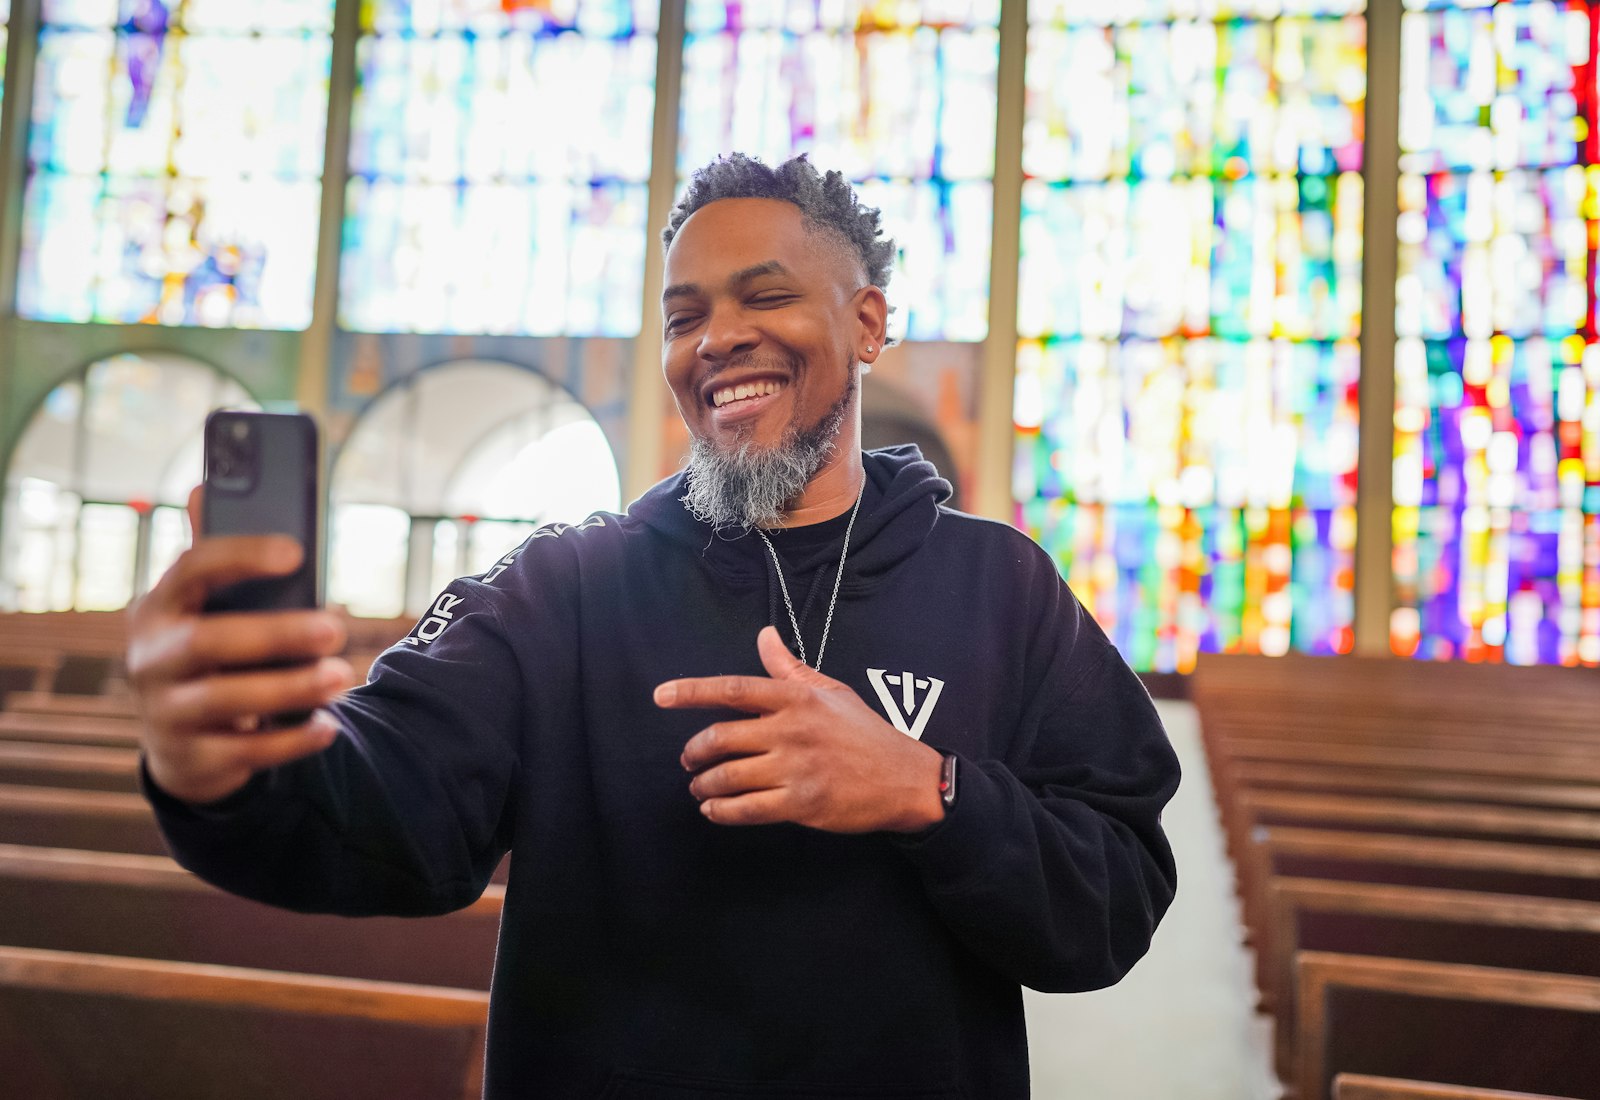 At first, Smith's TikTok focused on popular media such as movies and music, but he quickly realized that in order to be his authentic self, he couldn't shy away from talking about his Catholic faith.